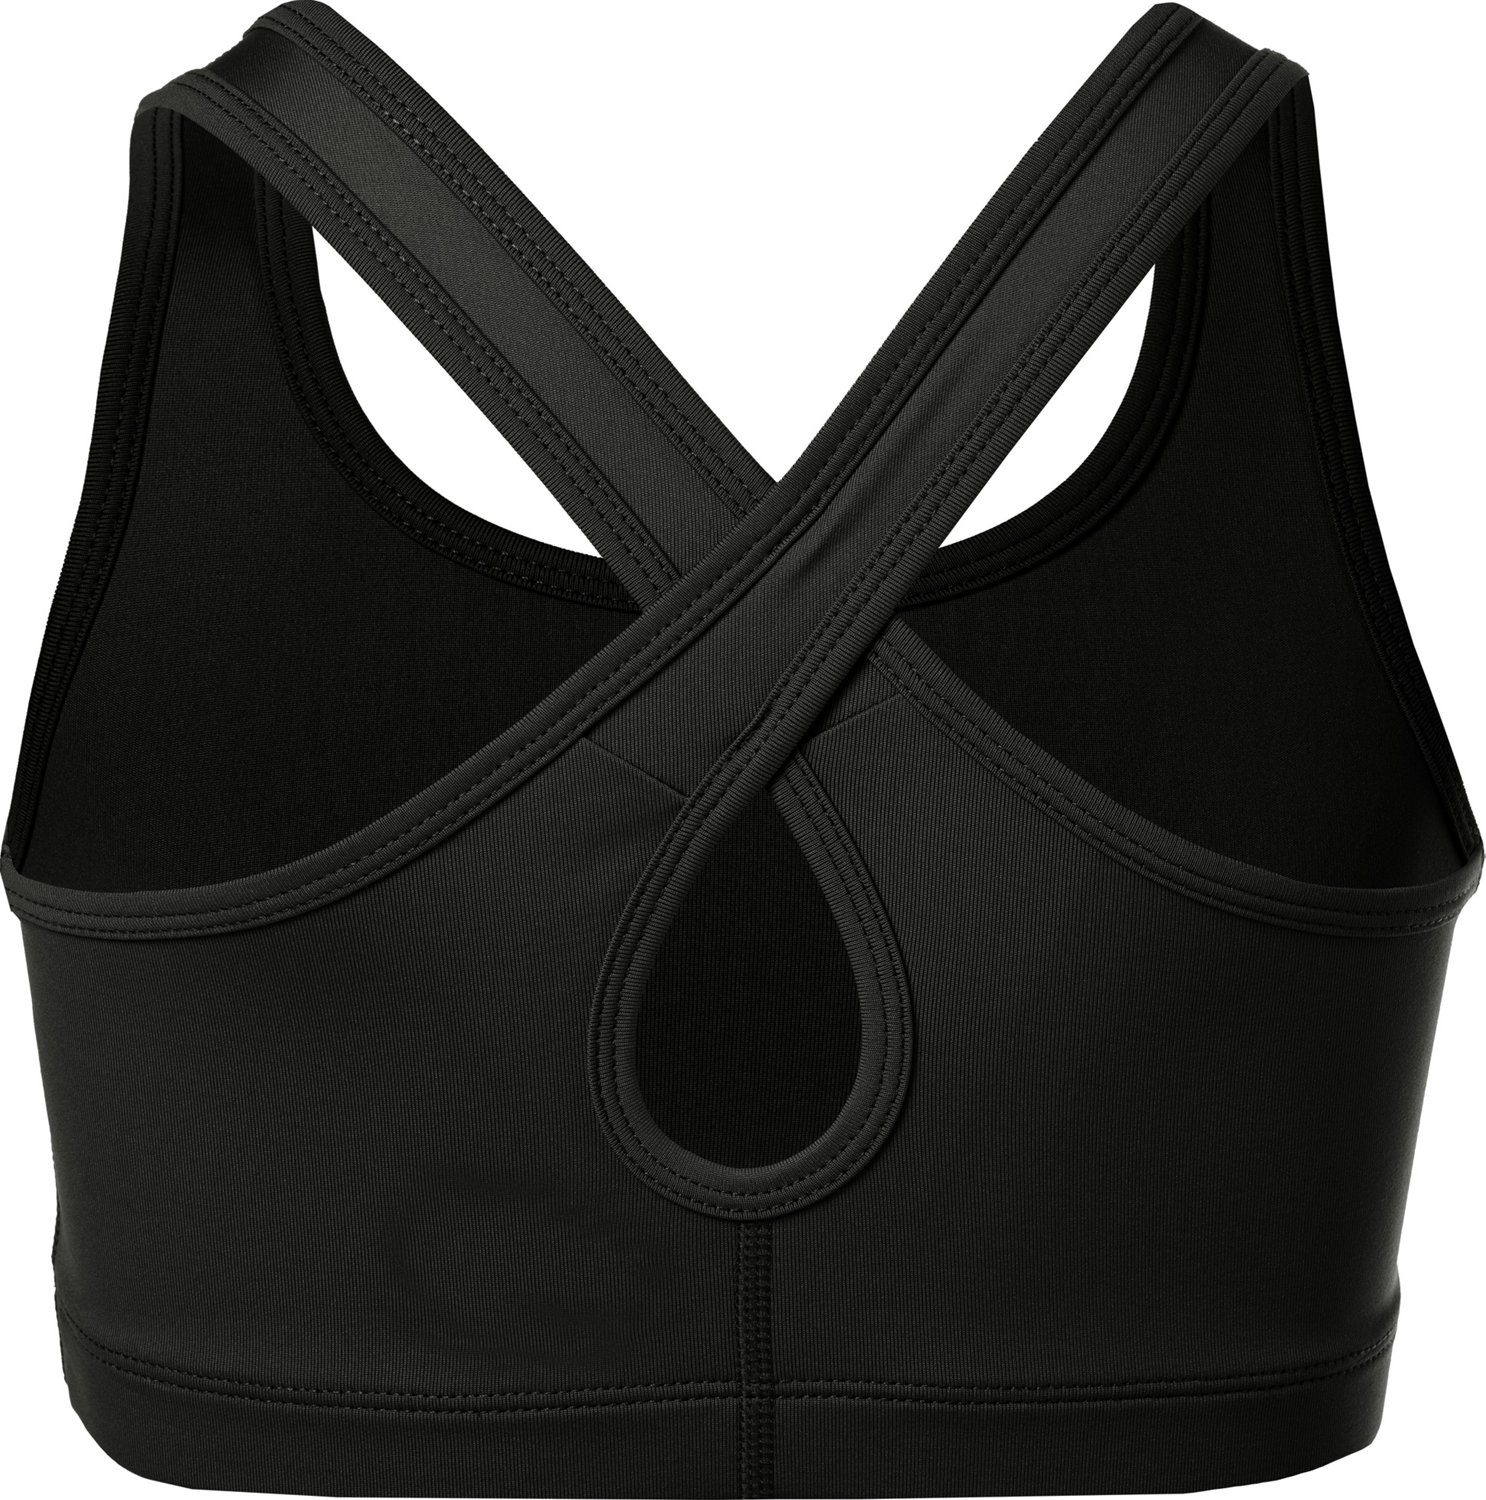 BCG Yoga Athletic Workout Tank Top Racerback Black With Shelf Bra Small